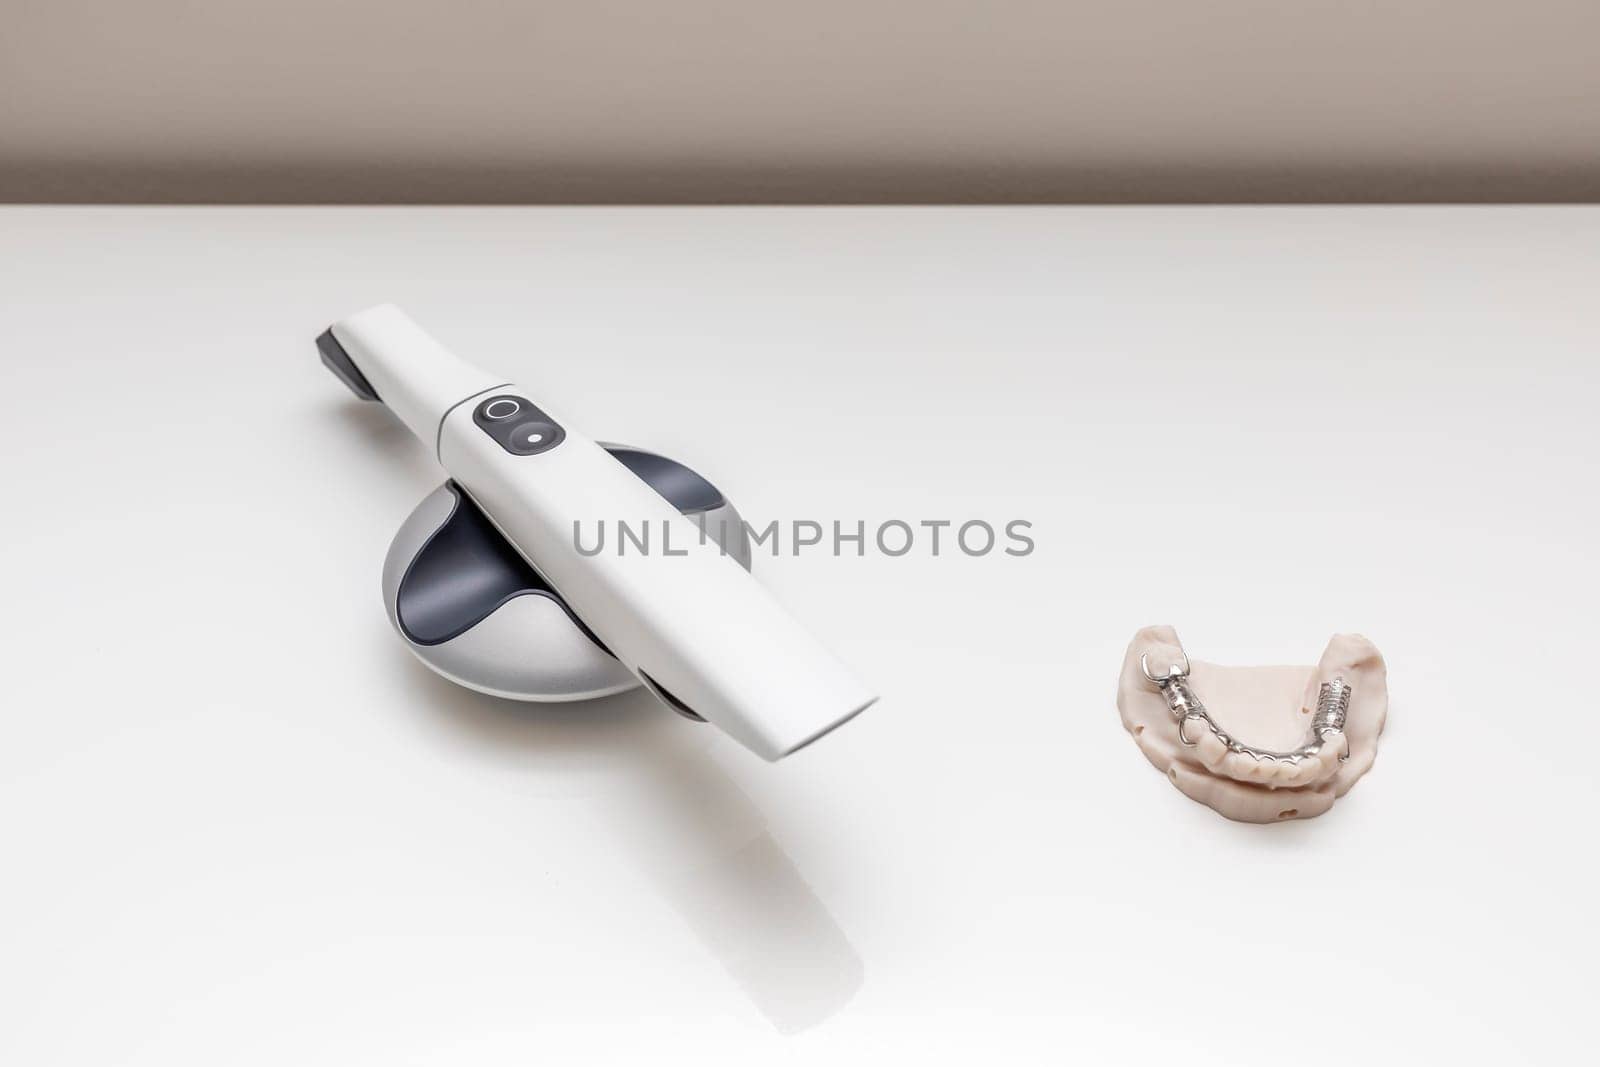 Bridge Printed By 3d Printer on Table. 3D Intraoral Teeth Scanner For Imaging Tooth and Metal Frame Lower Partial Denture, Cobalt Chrome Dental Plate. No People. Dental Equipment, Device, Dentistry. by netatsi